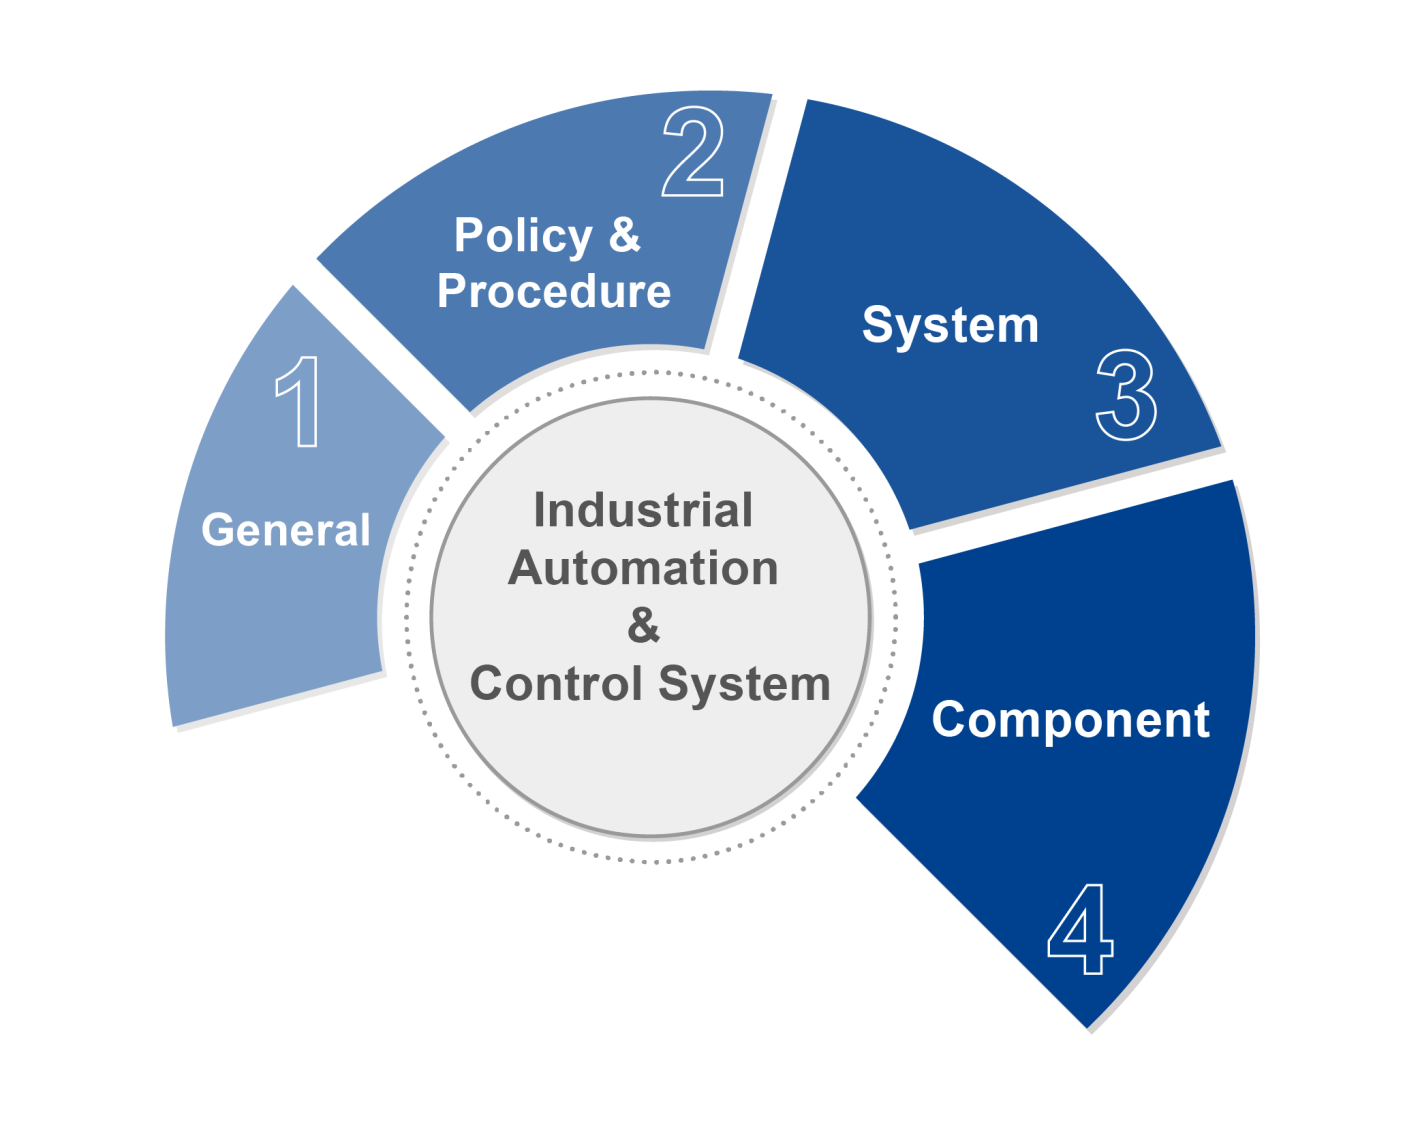 Cyber Security in Industrial Automation and Control